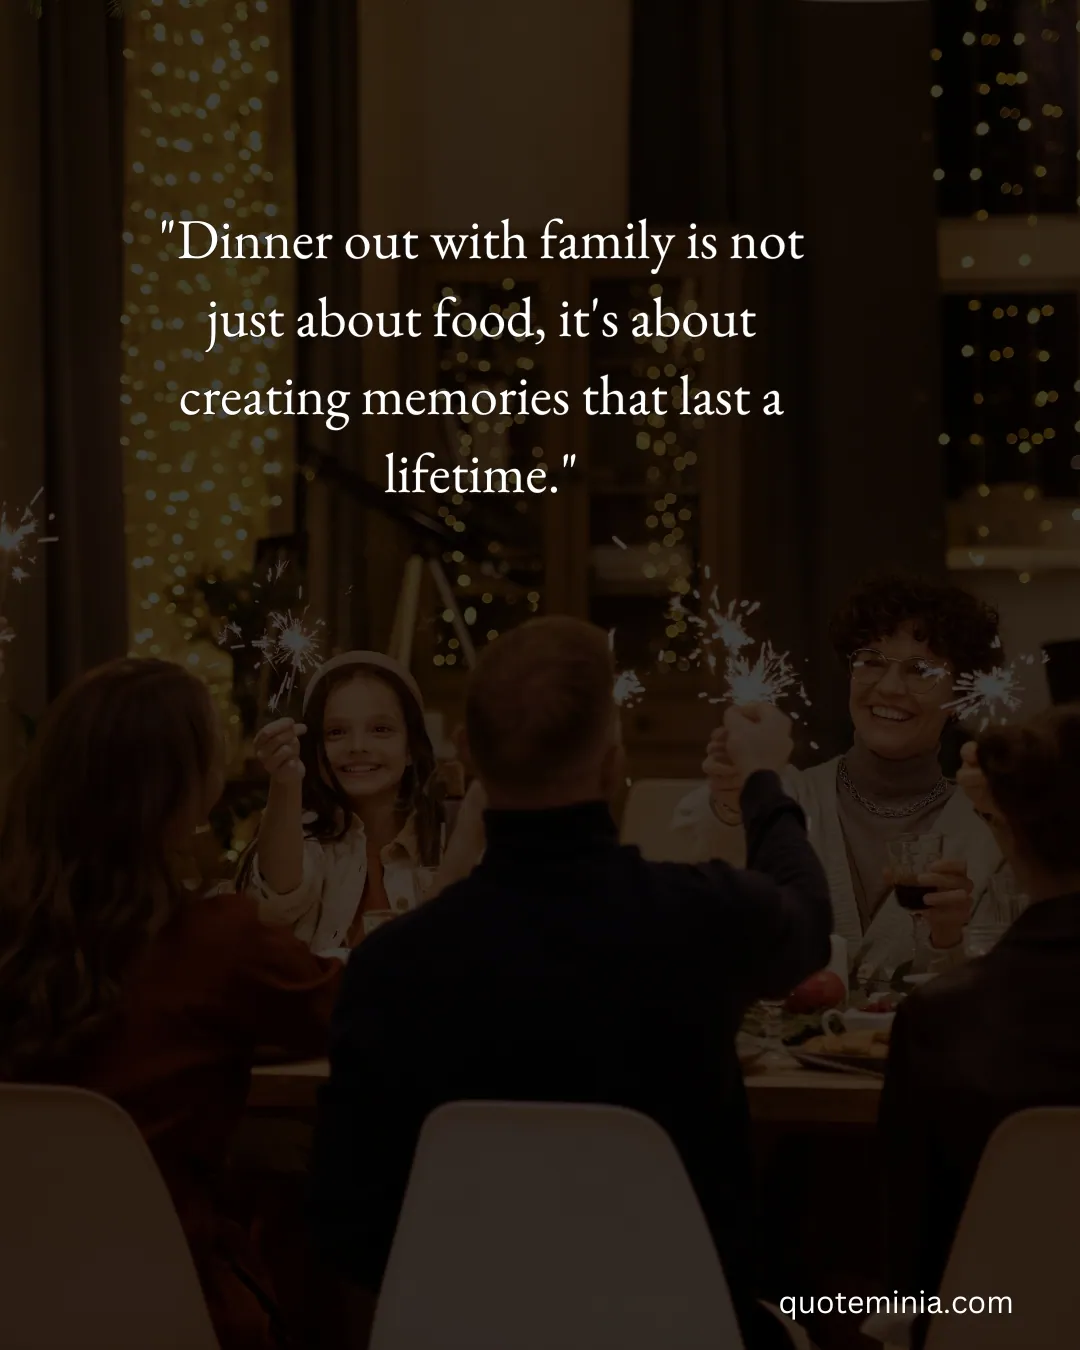 Dinner Out with Family Quotes 1